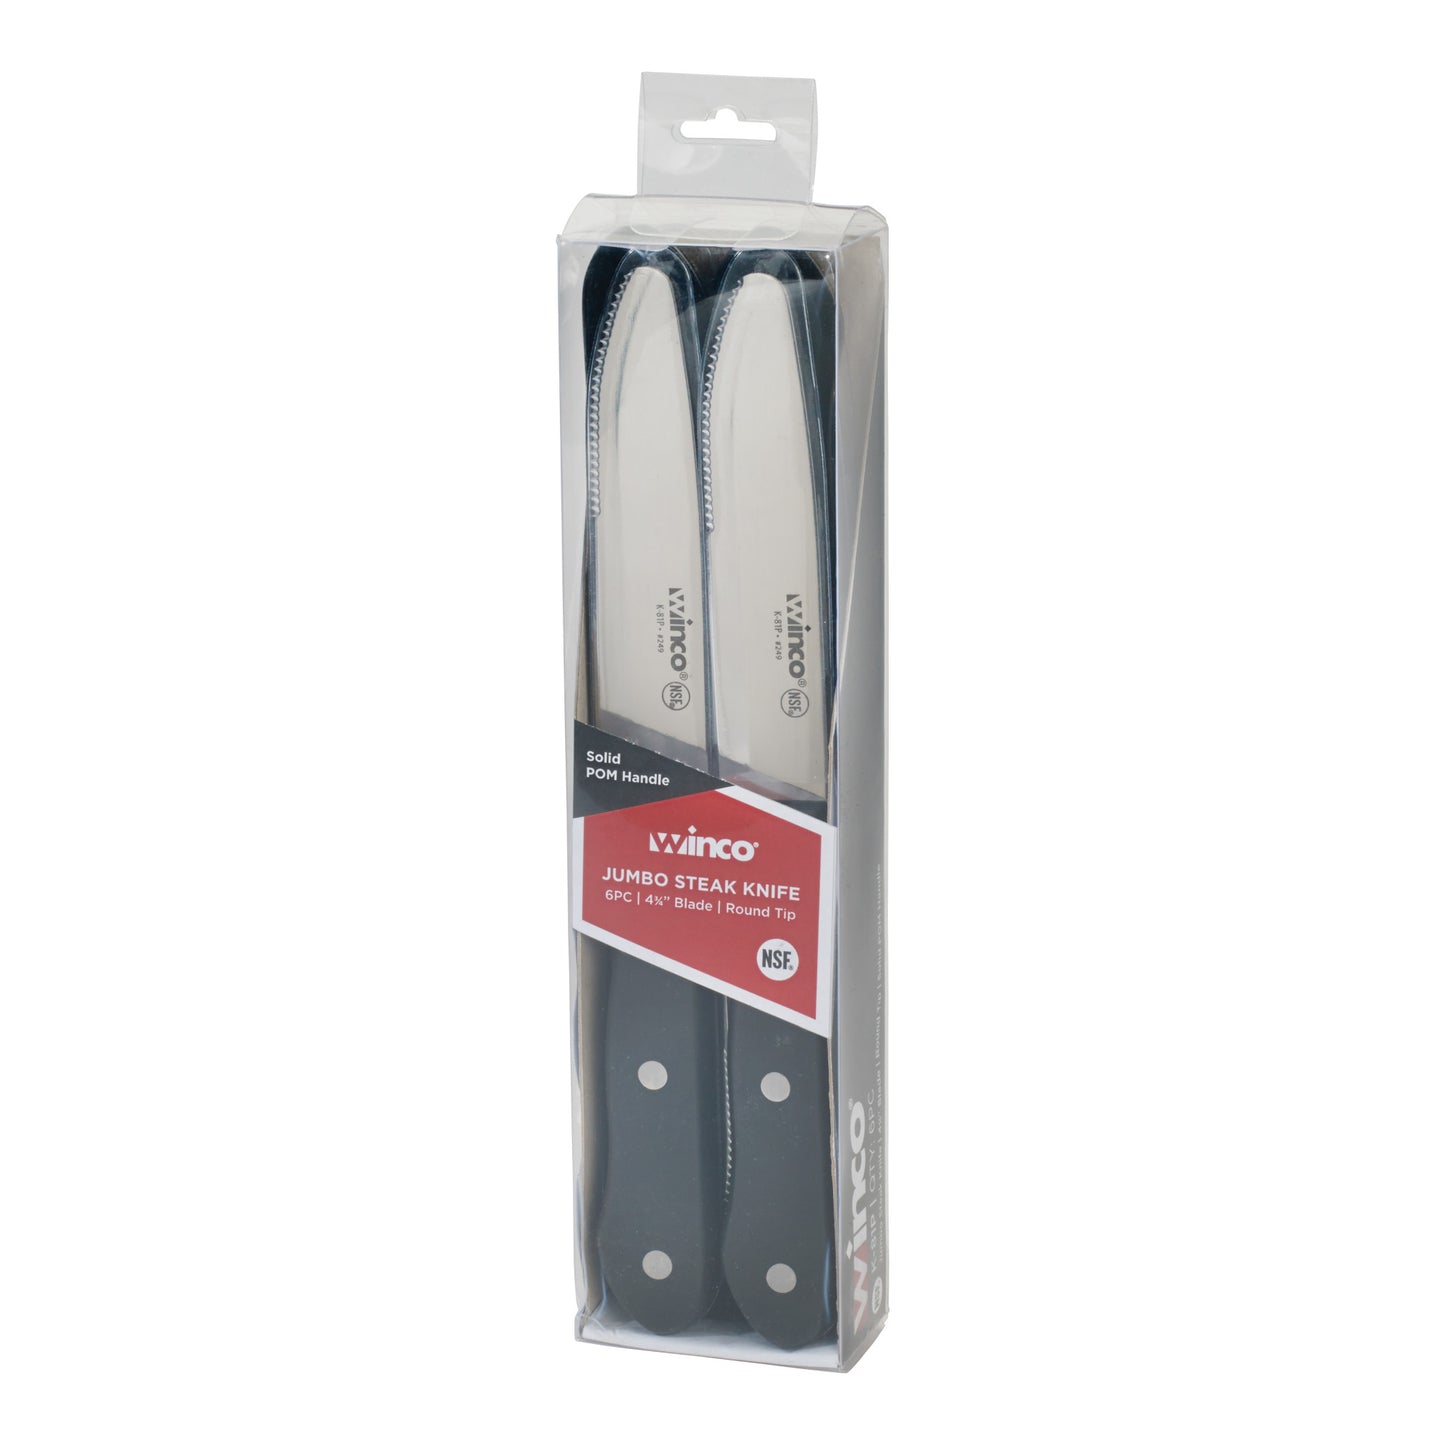 K-81P - Jumbo Steak Knives, 4-3/4" Blade, Round Tip, Solid POM Handle, 6-pieces/pack